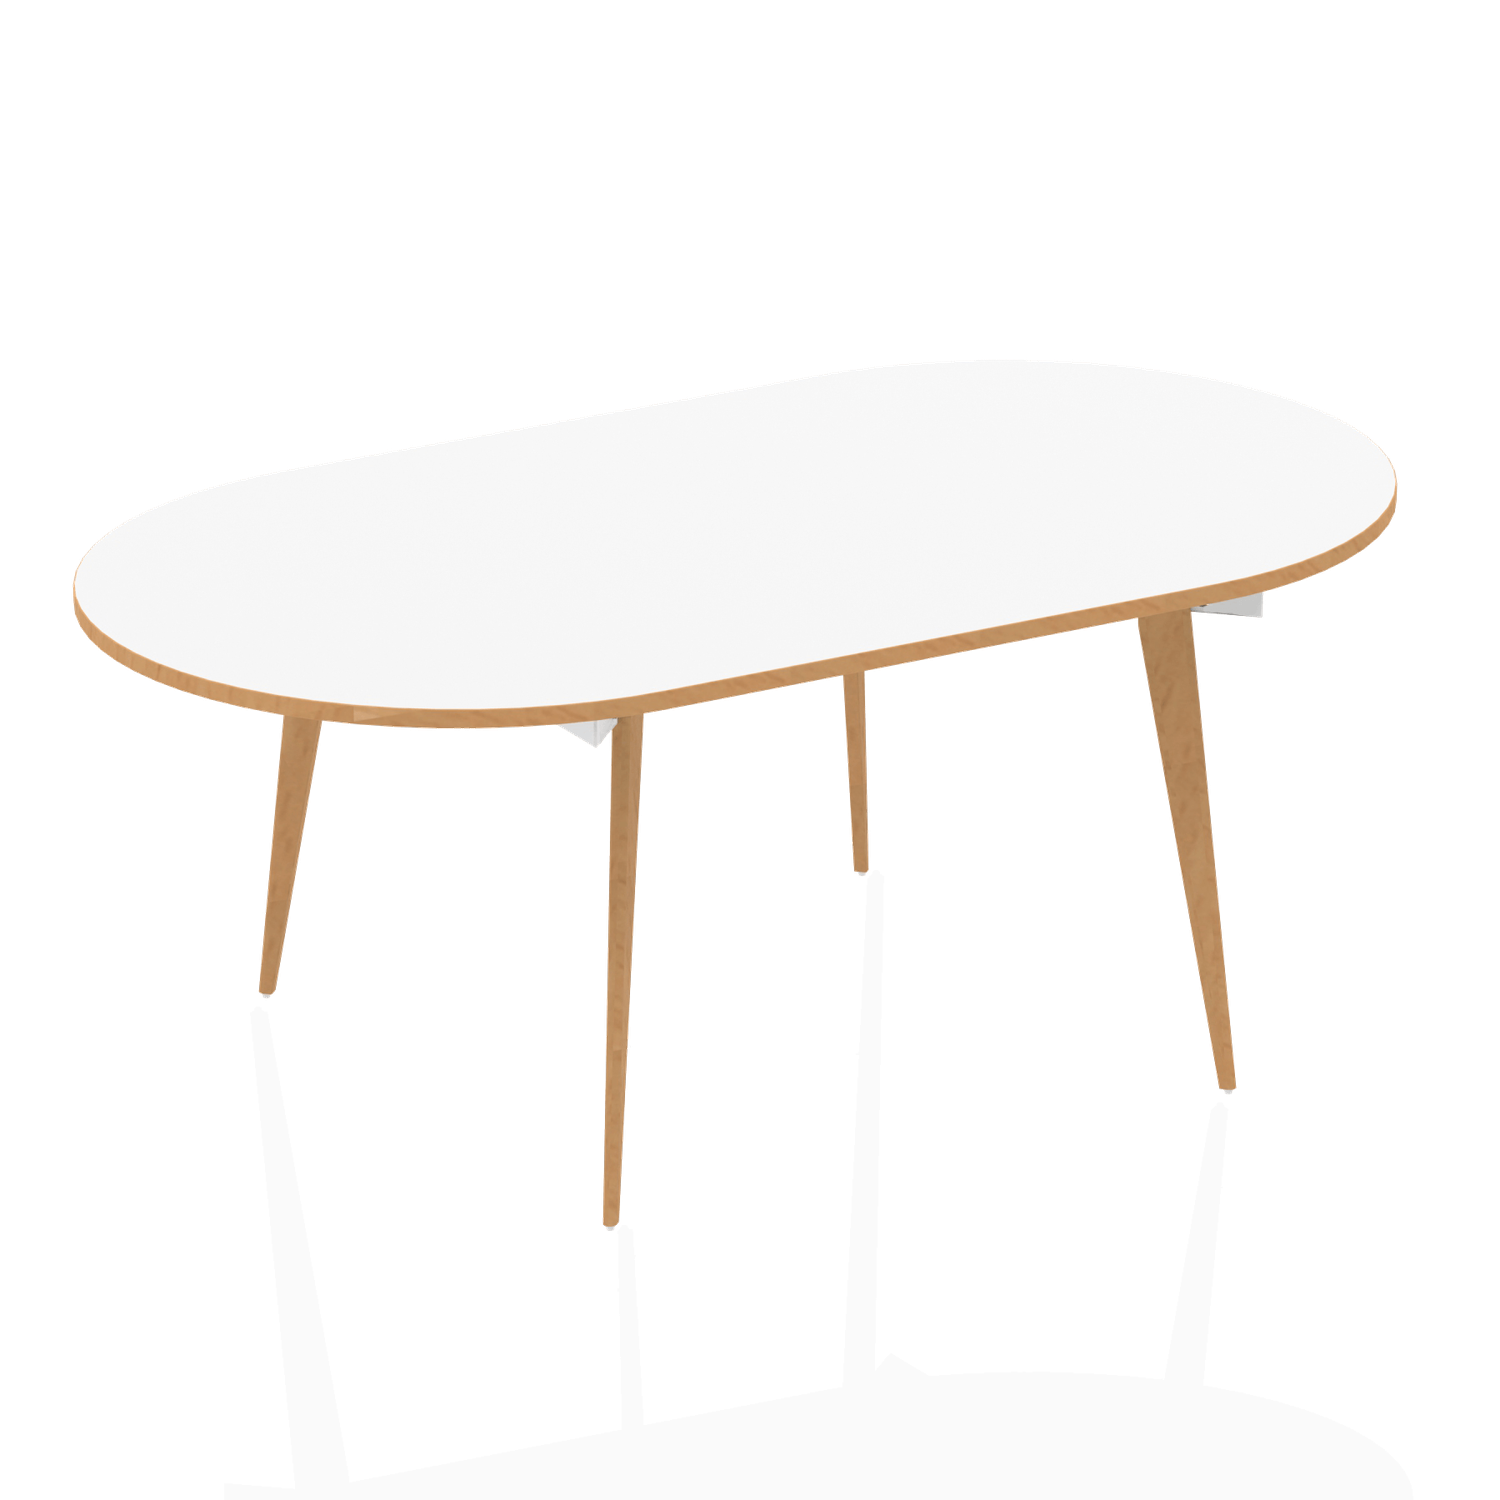 Boardroom / Meeting Oslo 1800mm Oval Boardroom Table White Top Natural Wood Edge White Frame OSL0127